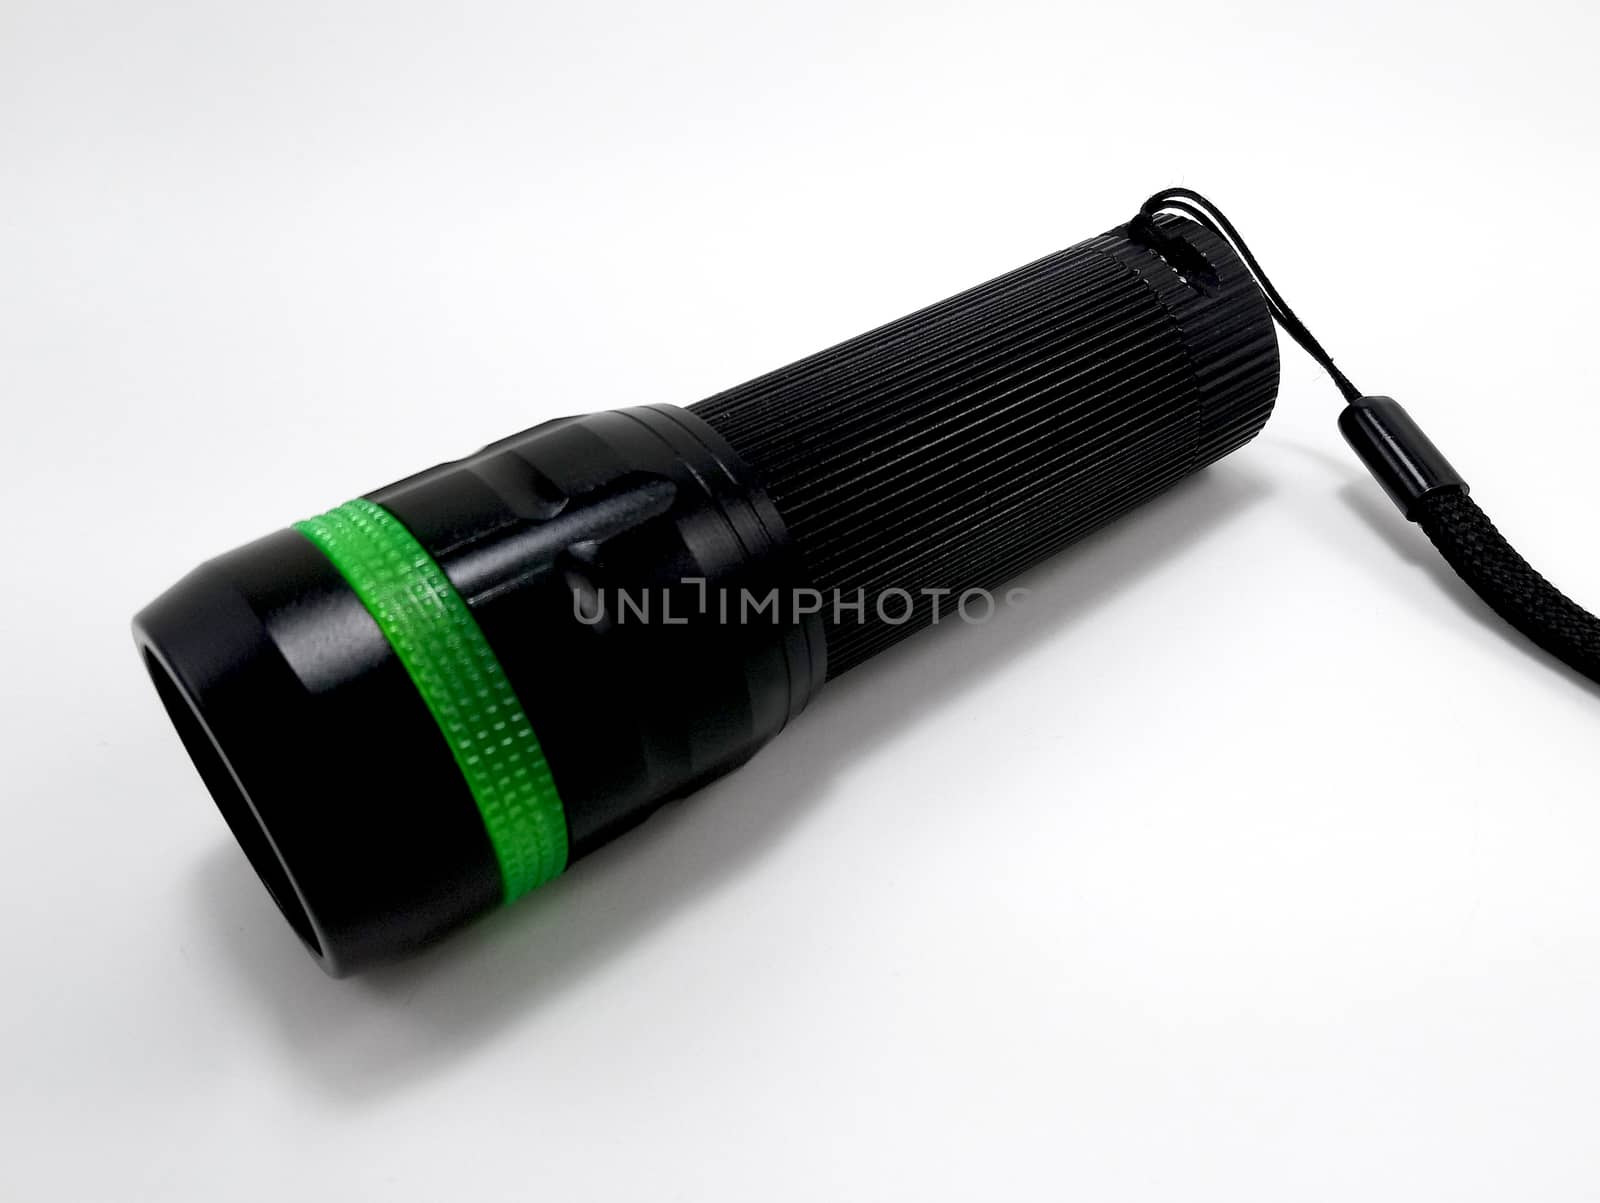 Black portable light emitting diode battery operated flashlight with hand strap